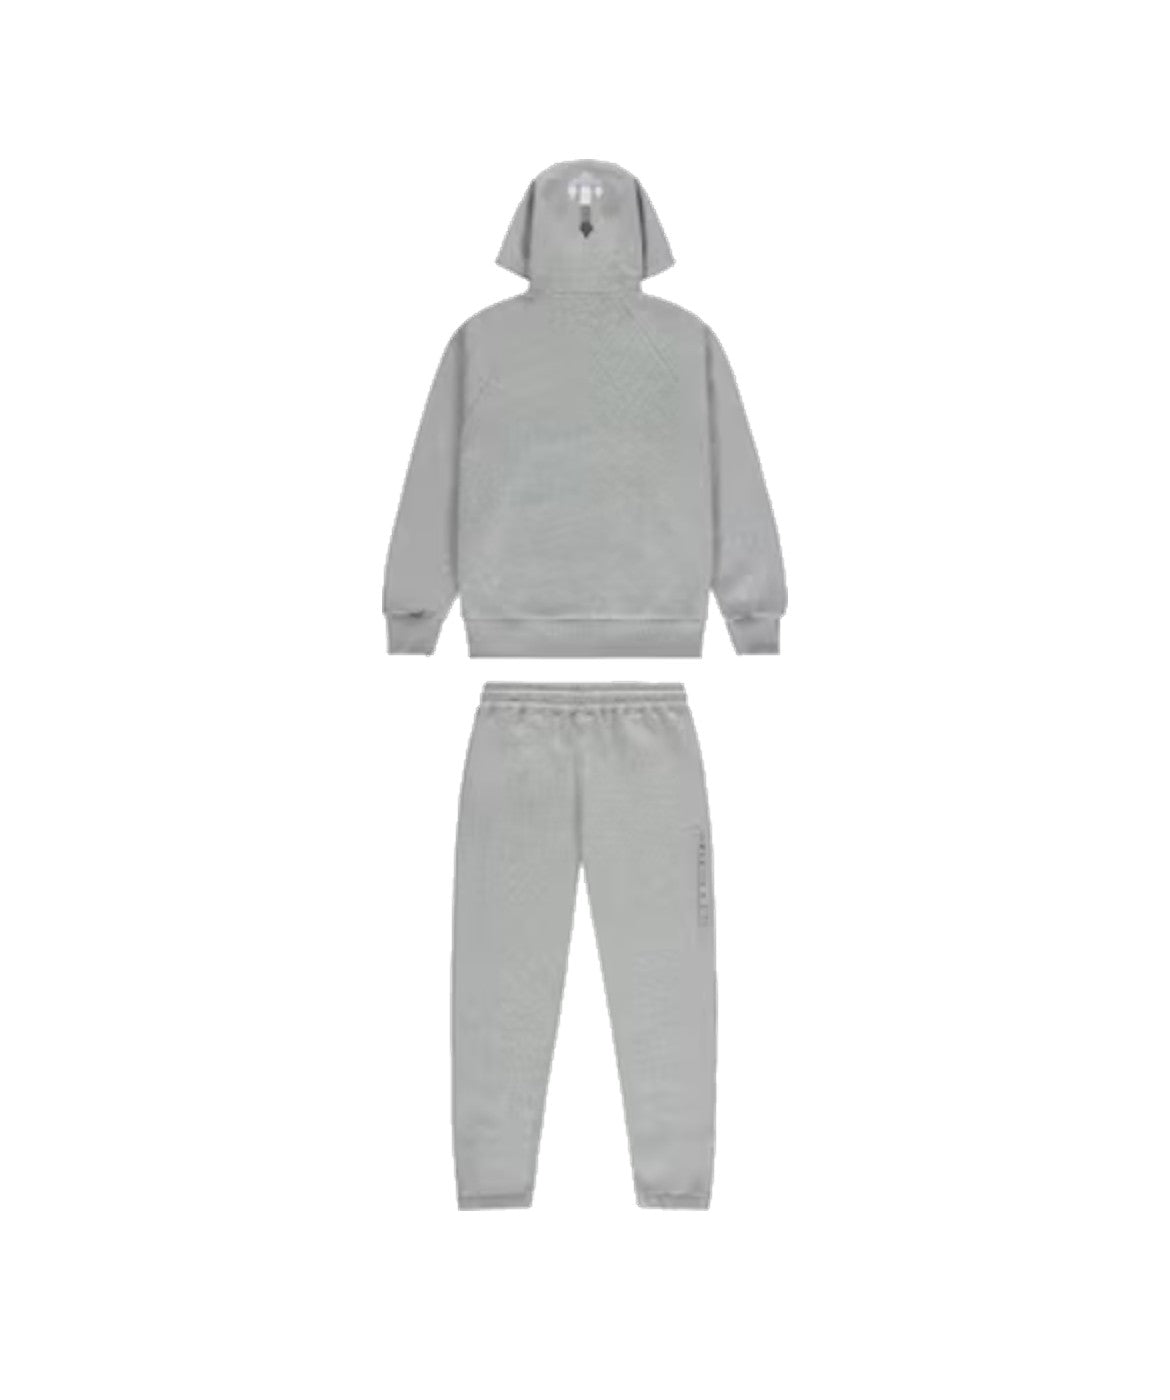 Trapstar Chenille Decoded 2.0 Hooded Tracksuit - Grey/Blue